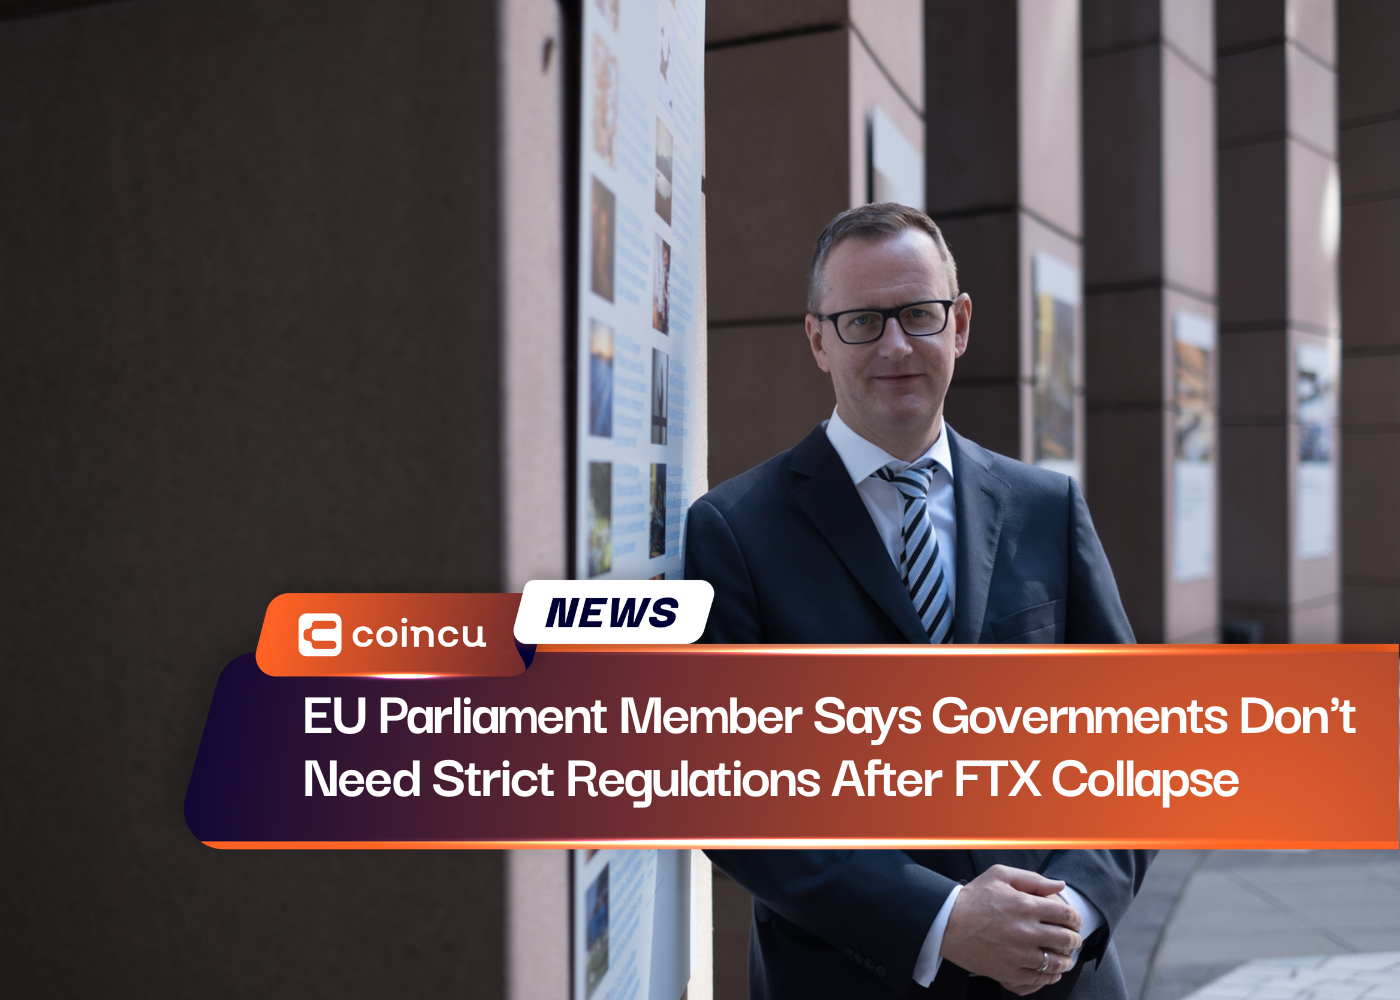 EU Parliament Member Says Governments Don't Need Strict Regulations After FTX Collapse